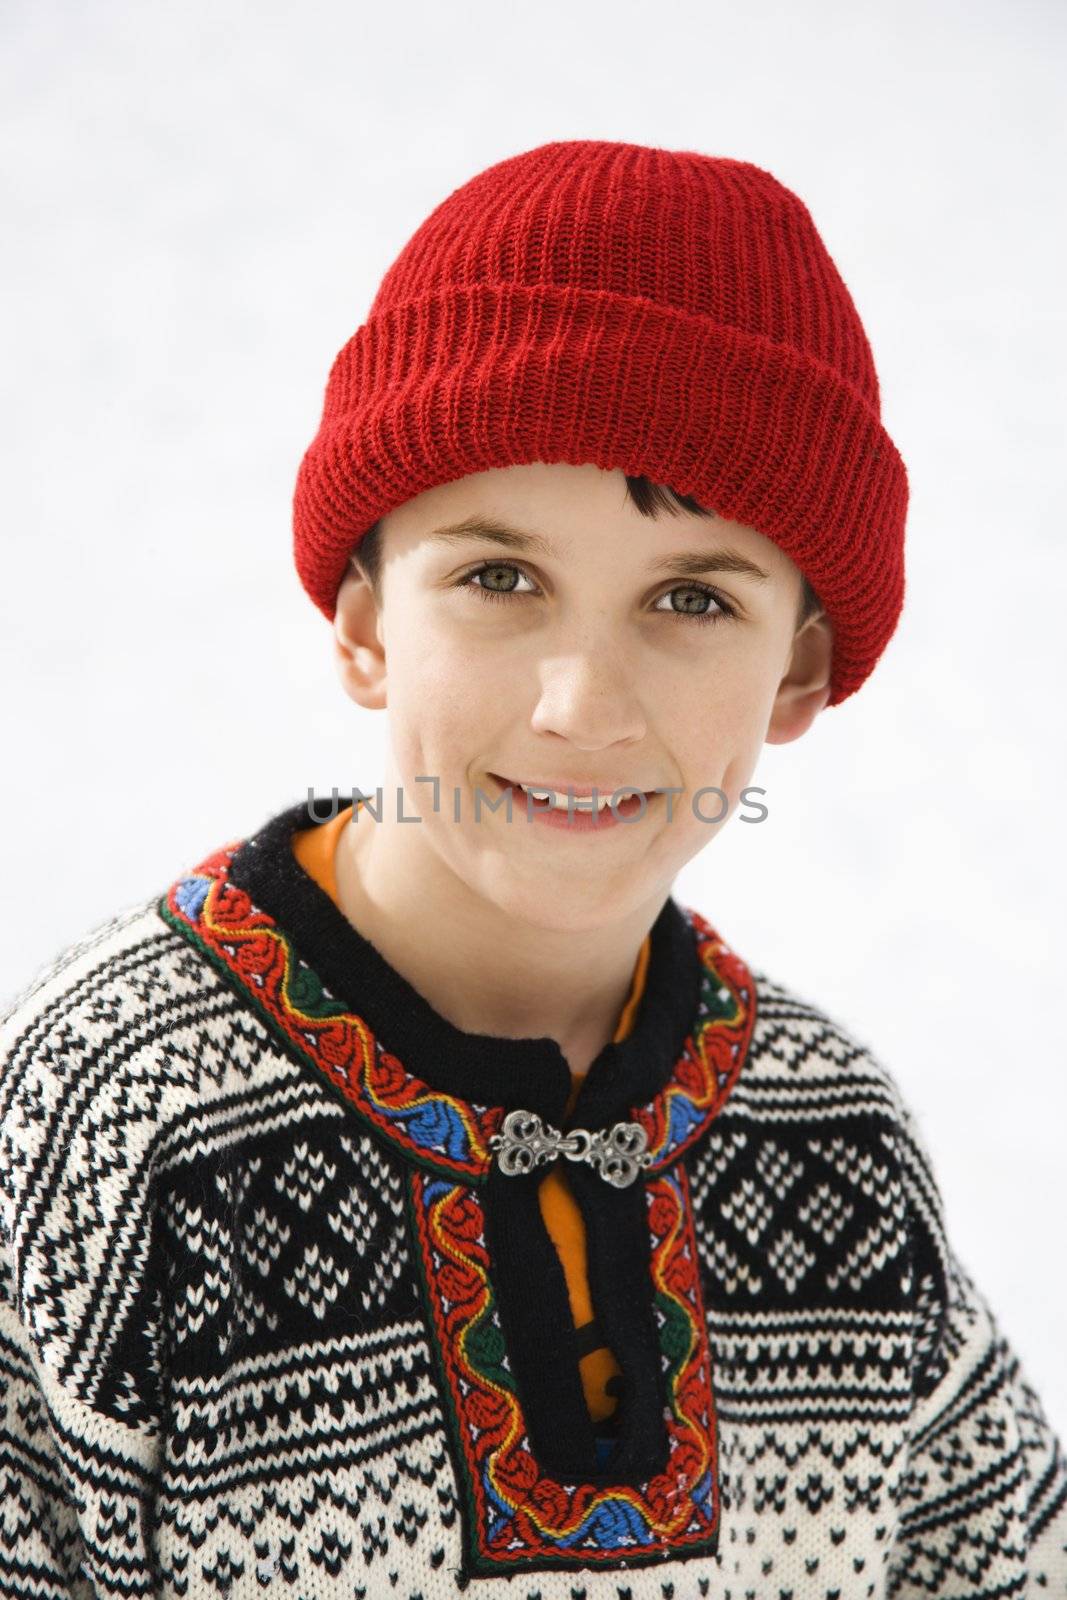 Portrait of Caucasian boy wearing sweater and red winter cap smiling at viewer.